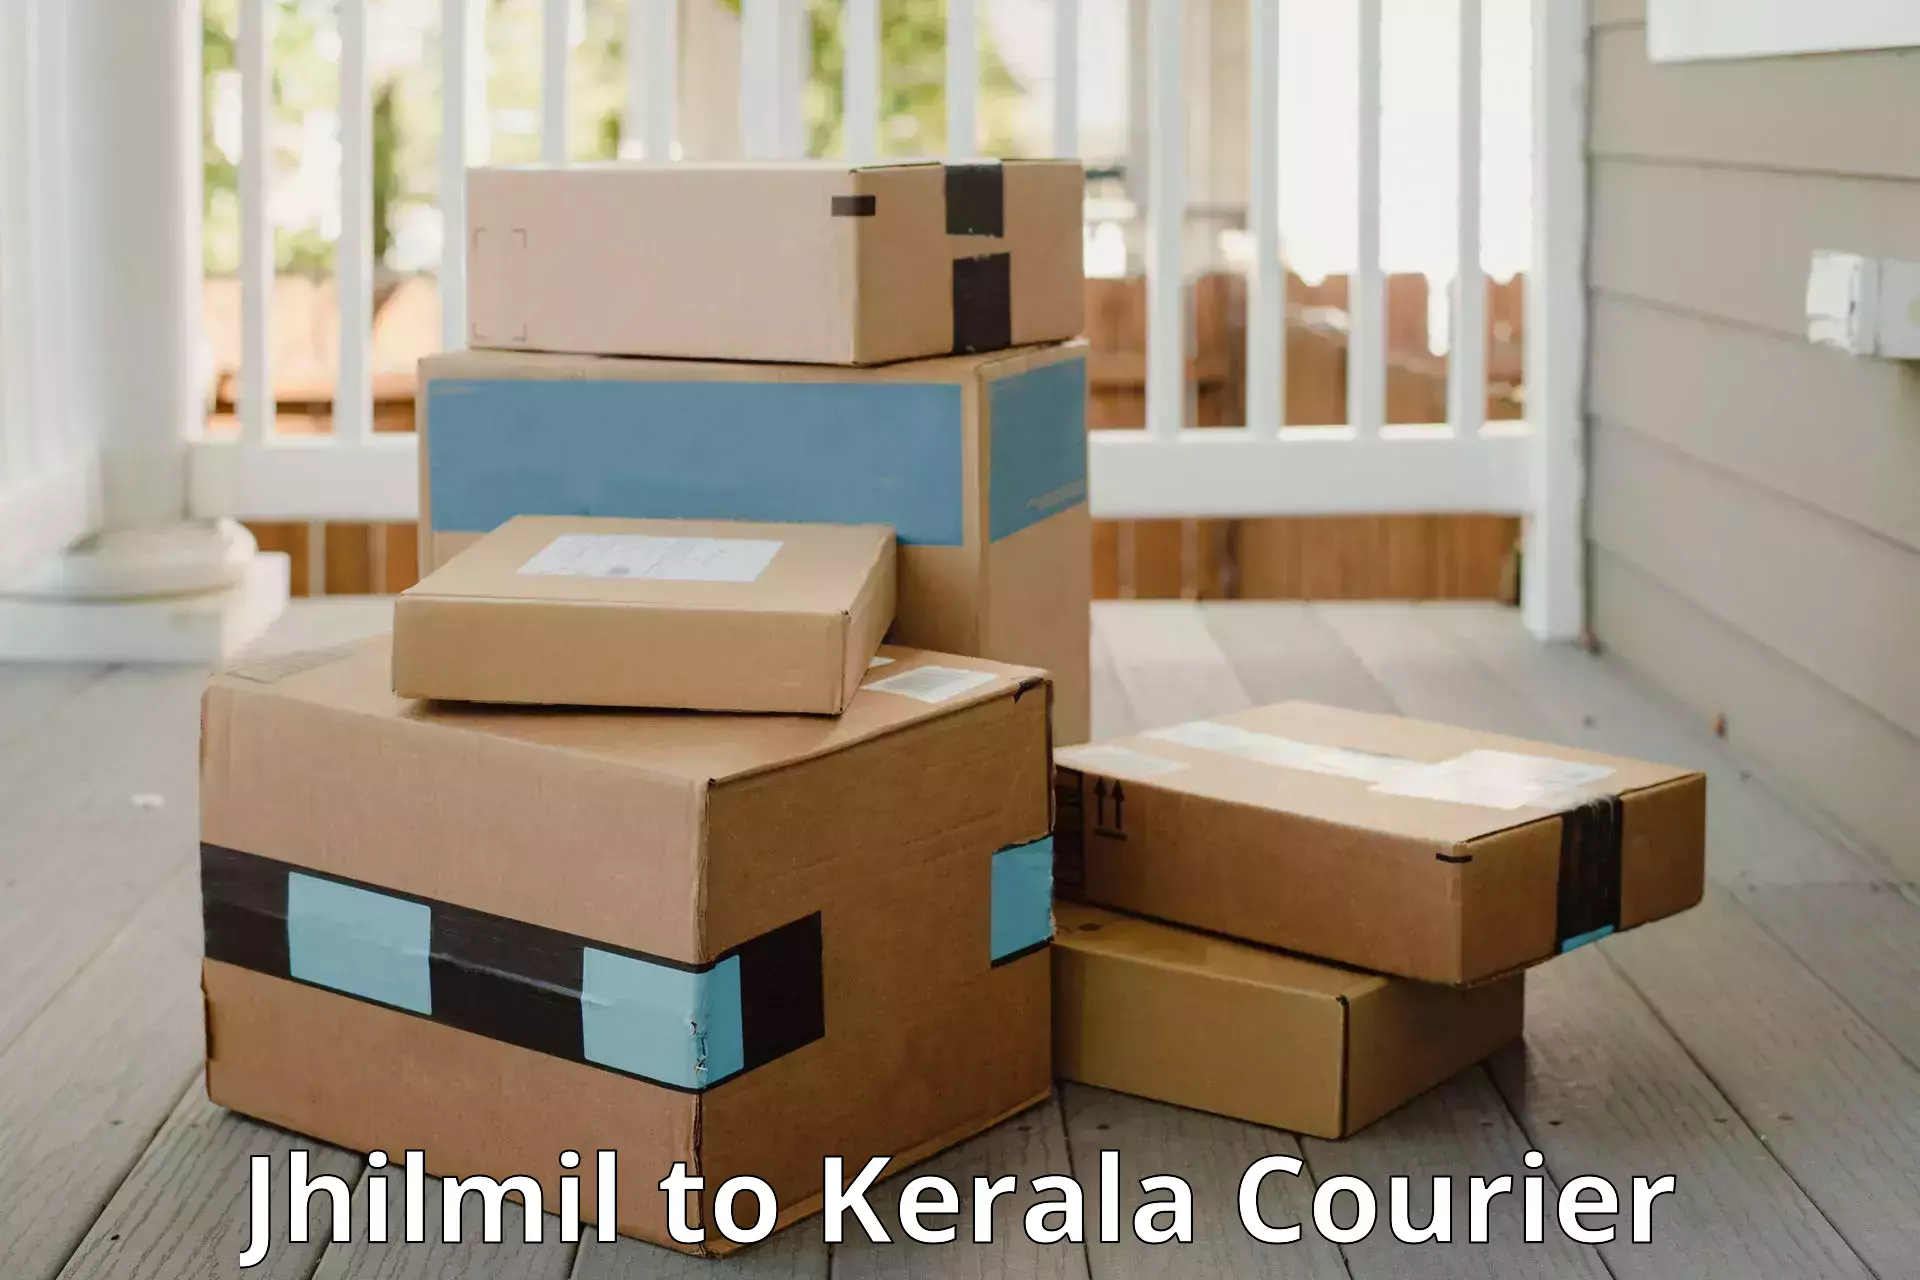 Holiday season luggage delivery Jhilmil to Kalpetta